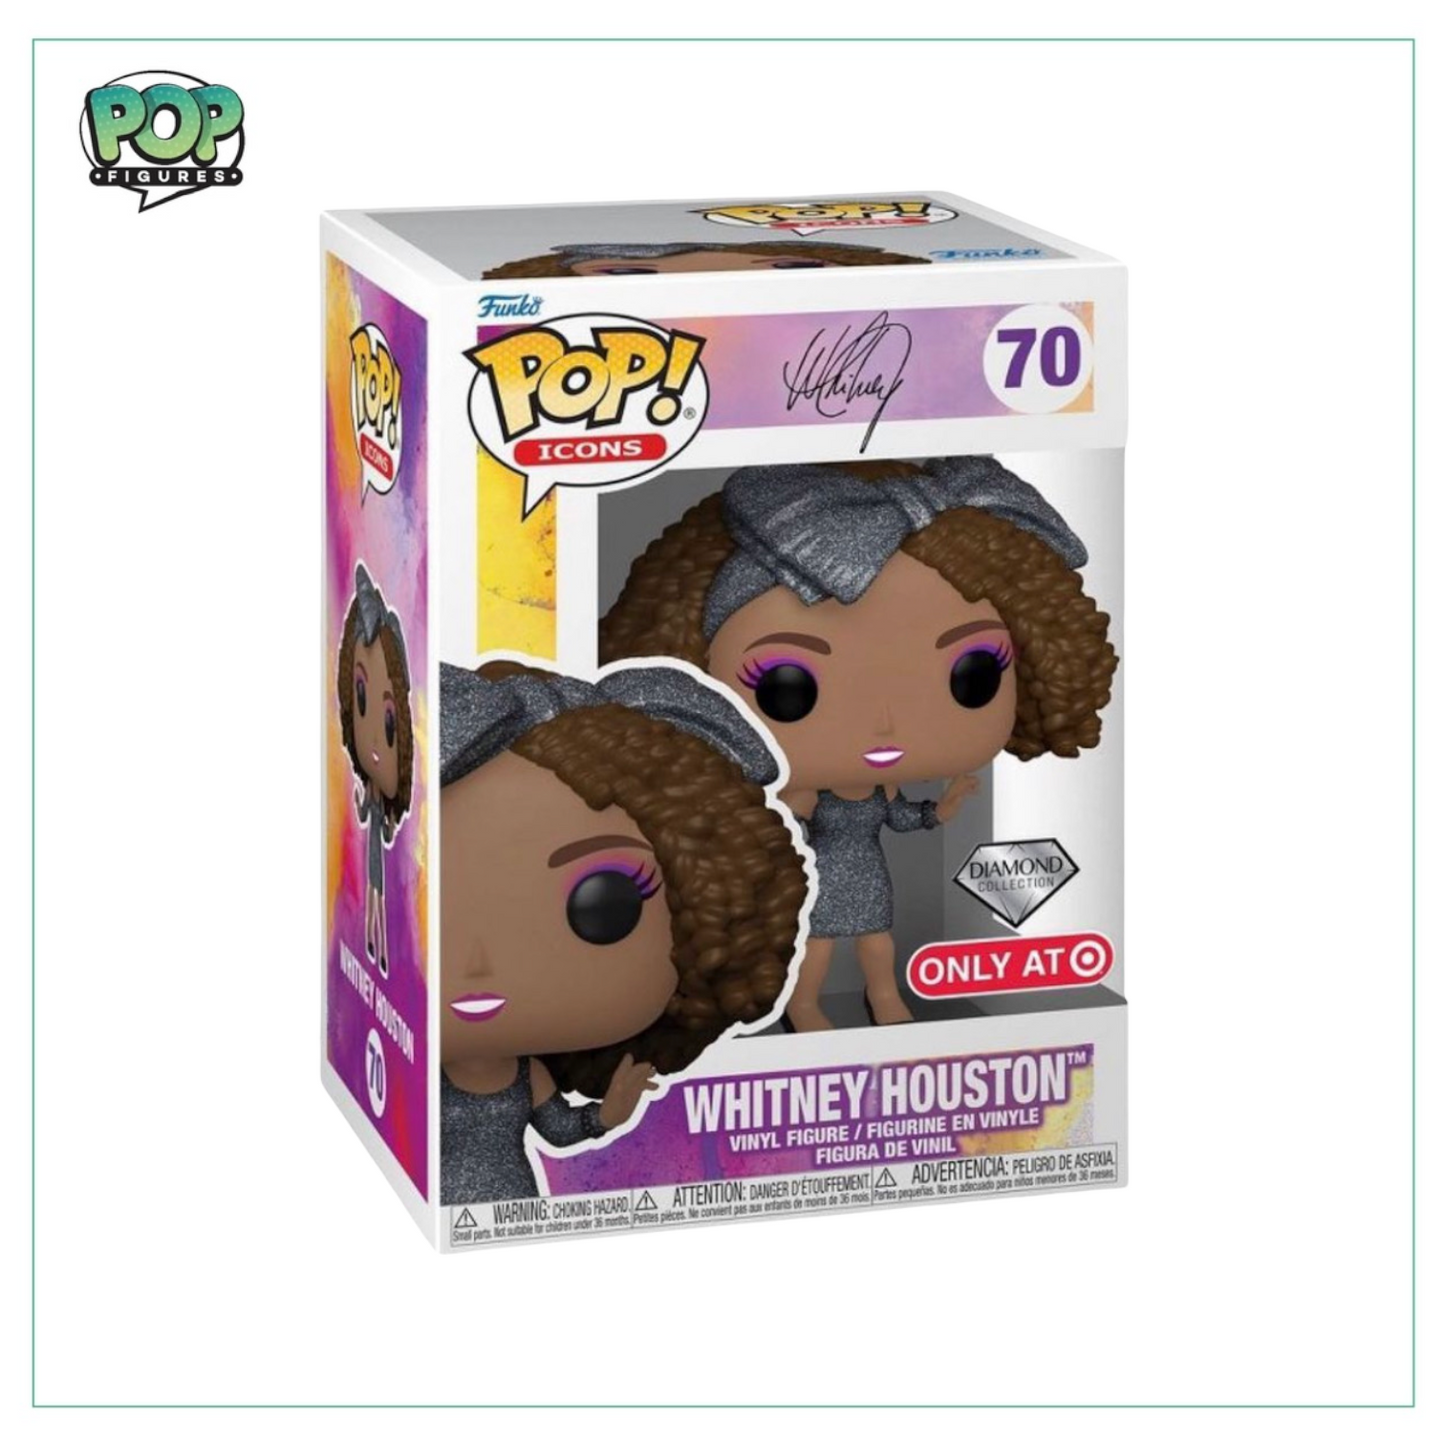 Whitney Houston #70 (Diamond Collection) Funko Pop! - Rocks - Target Exclusive - Angry Cat